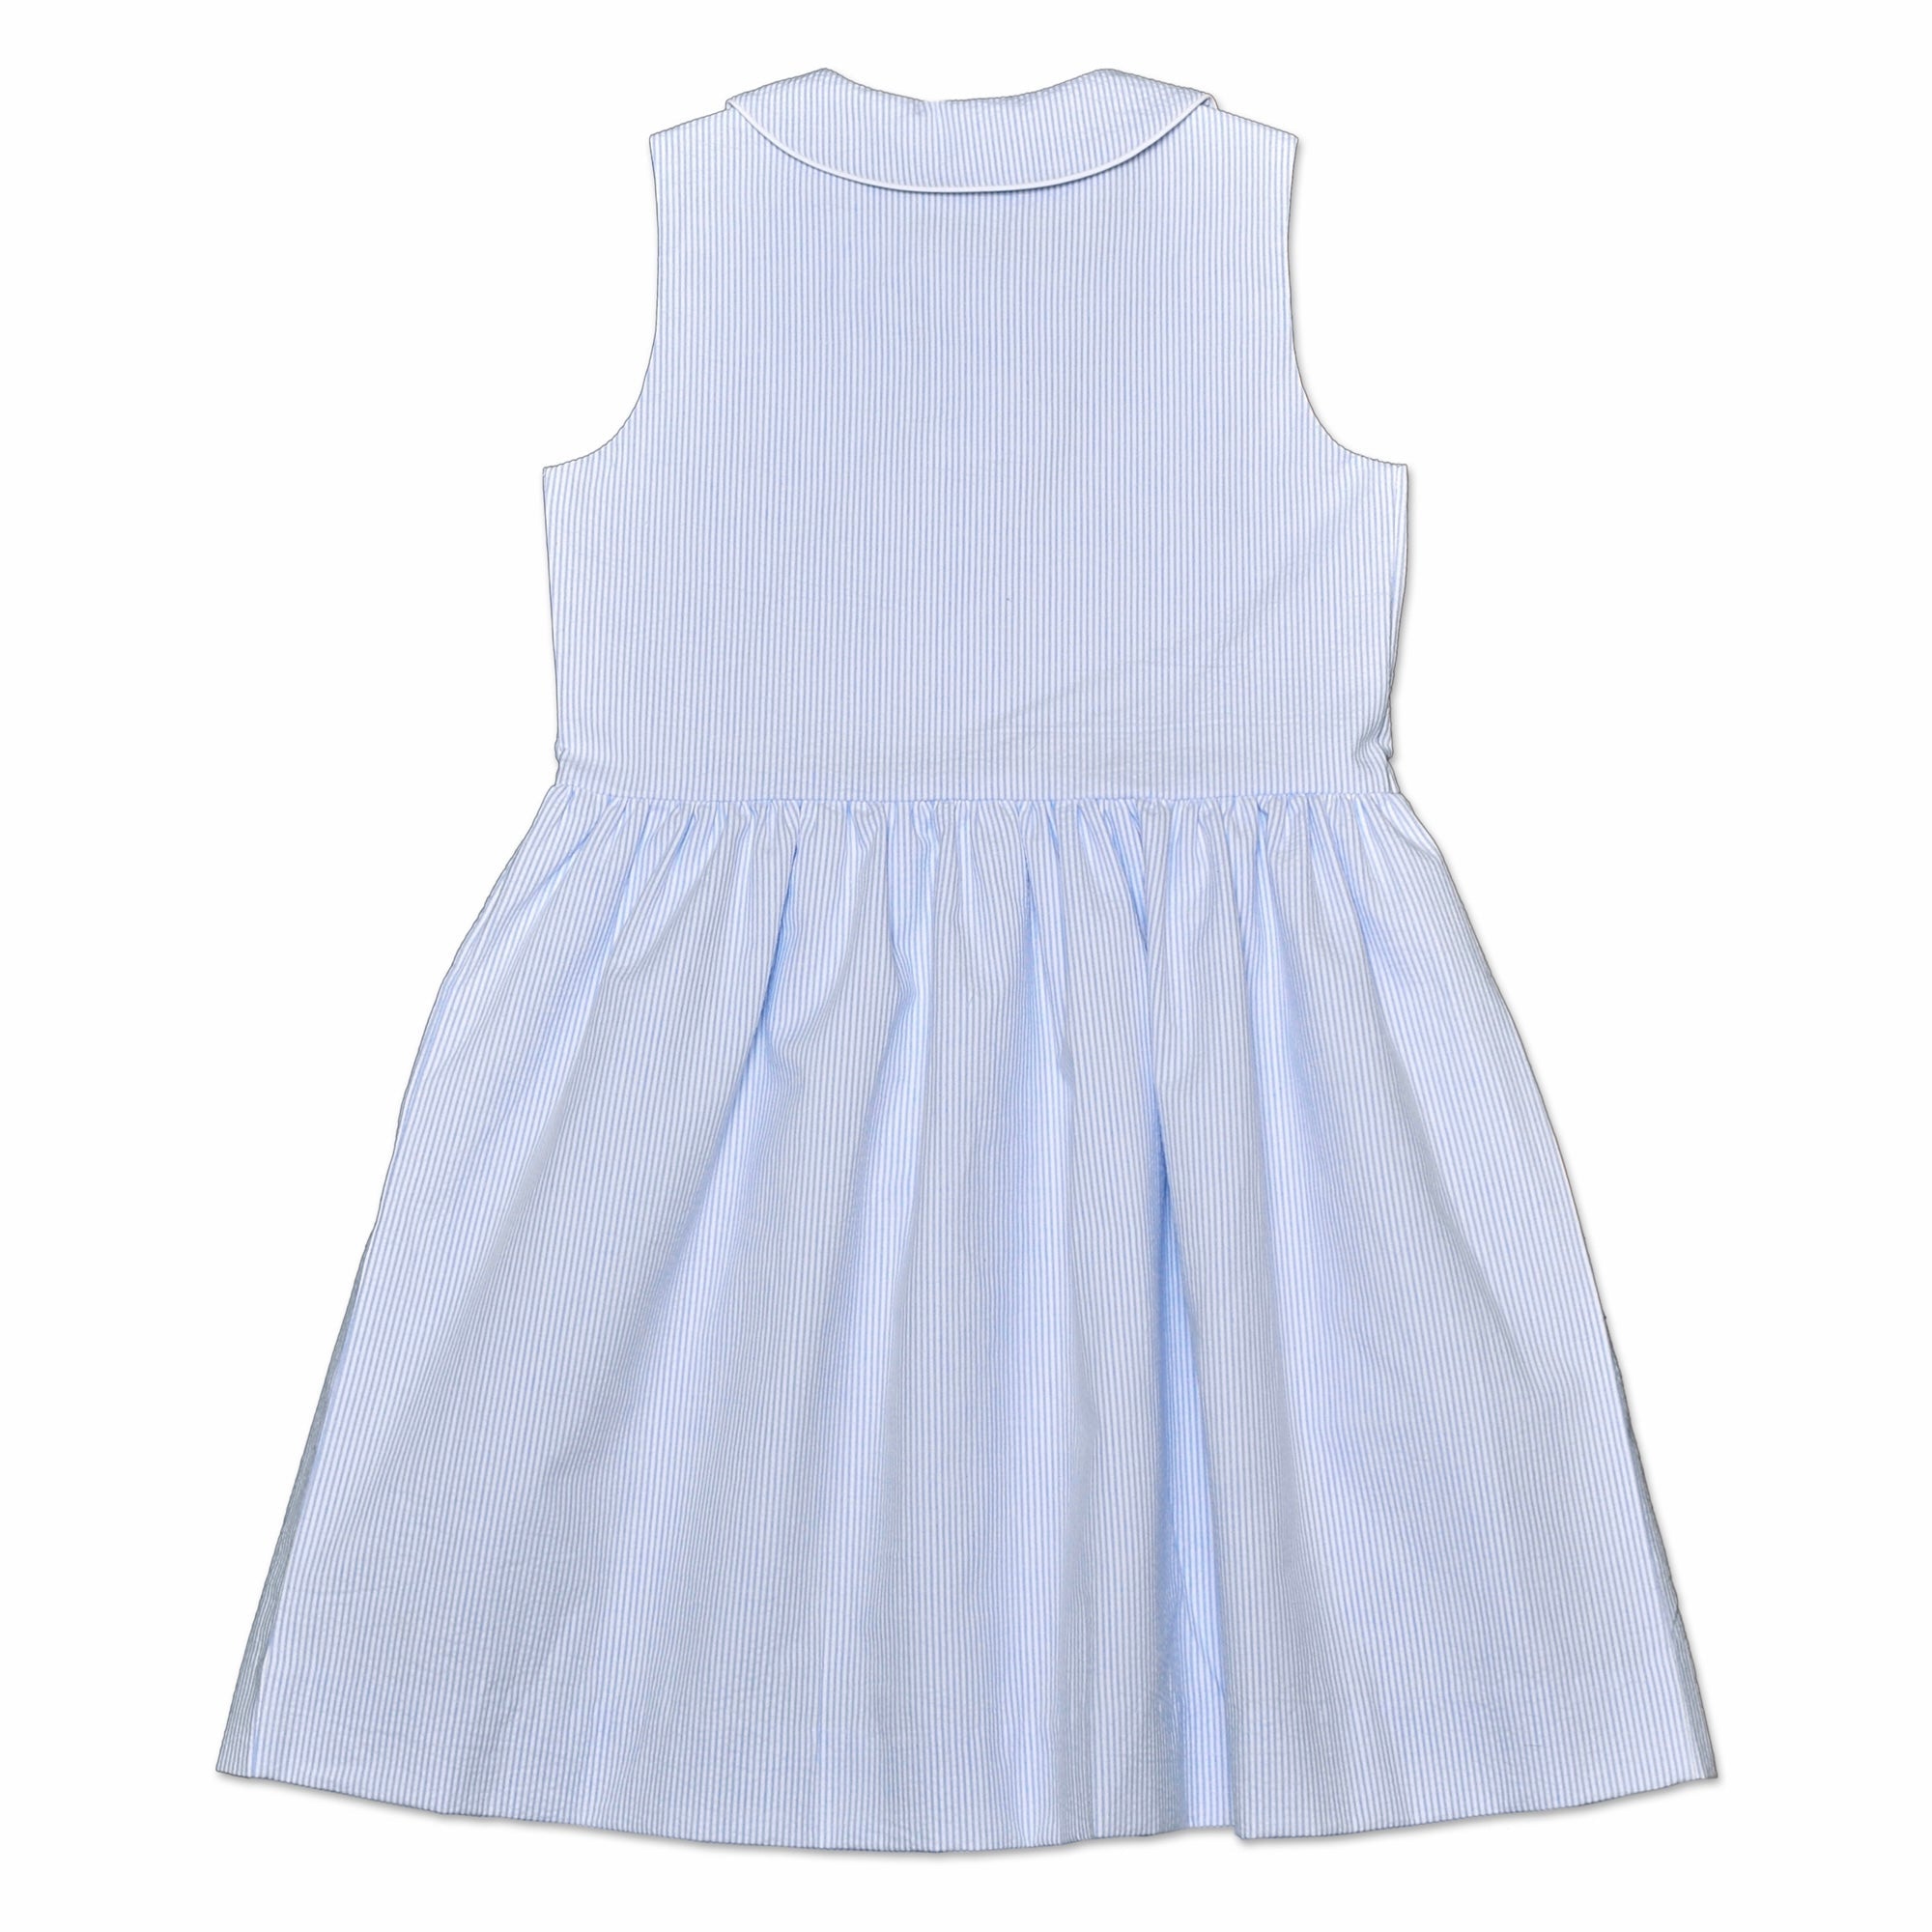 Charlotte Pale Blue And White Pin Stripe Dress - Cou Cou Baby